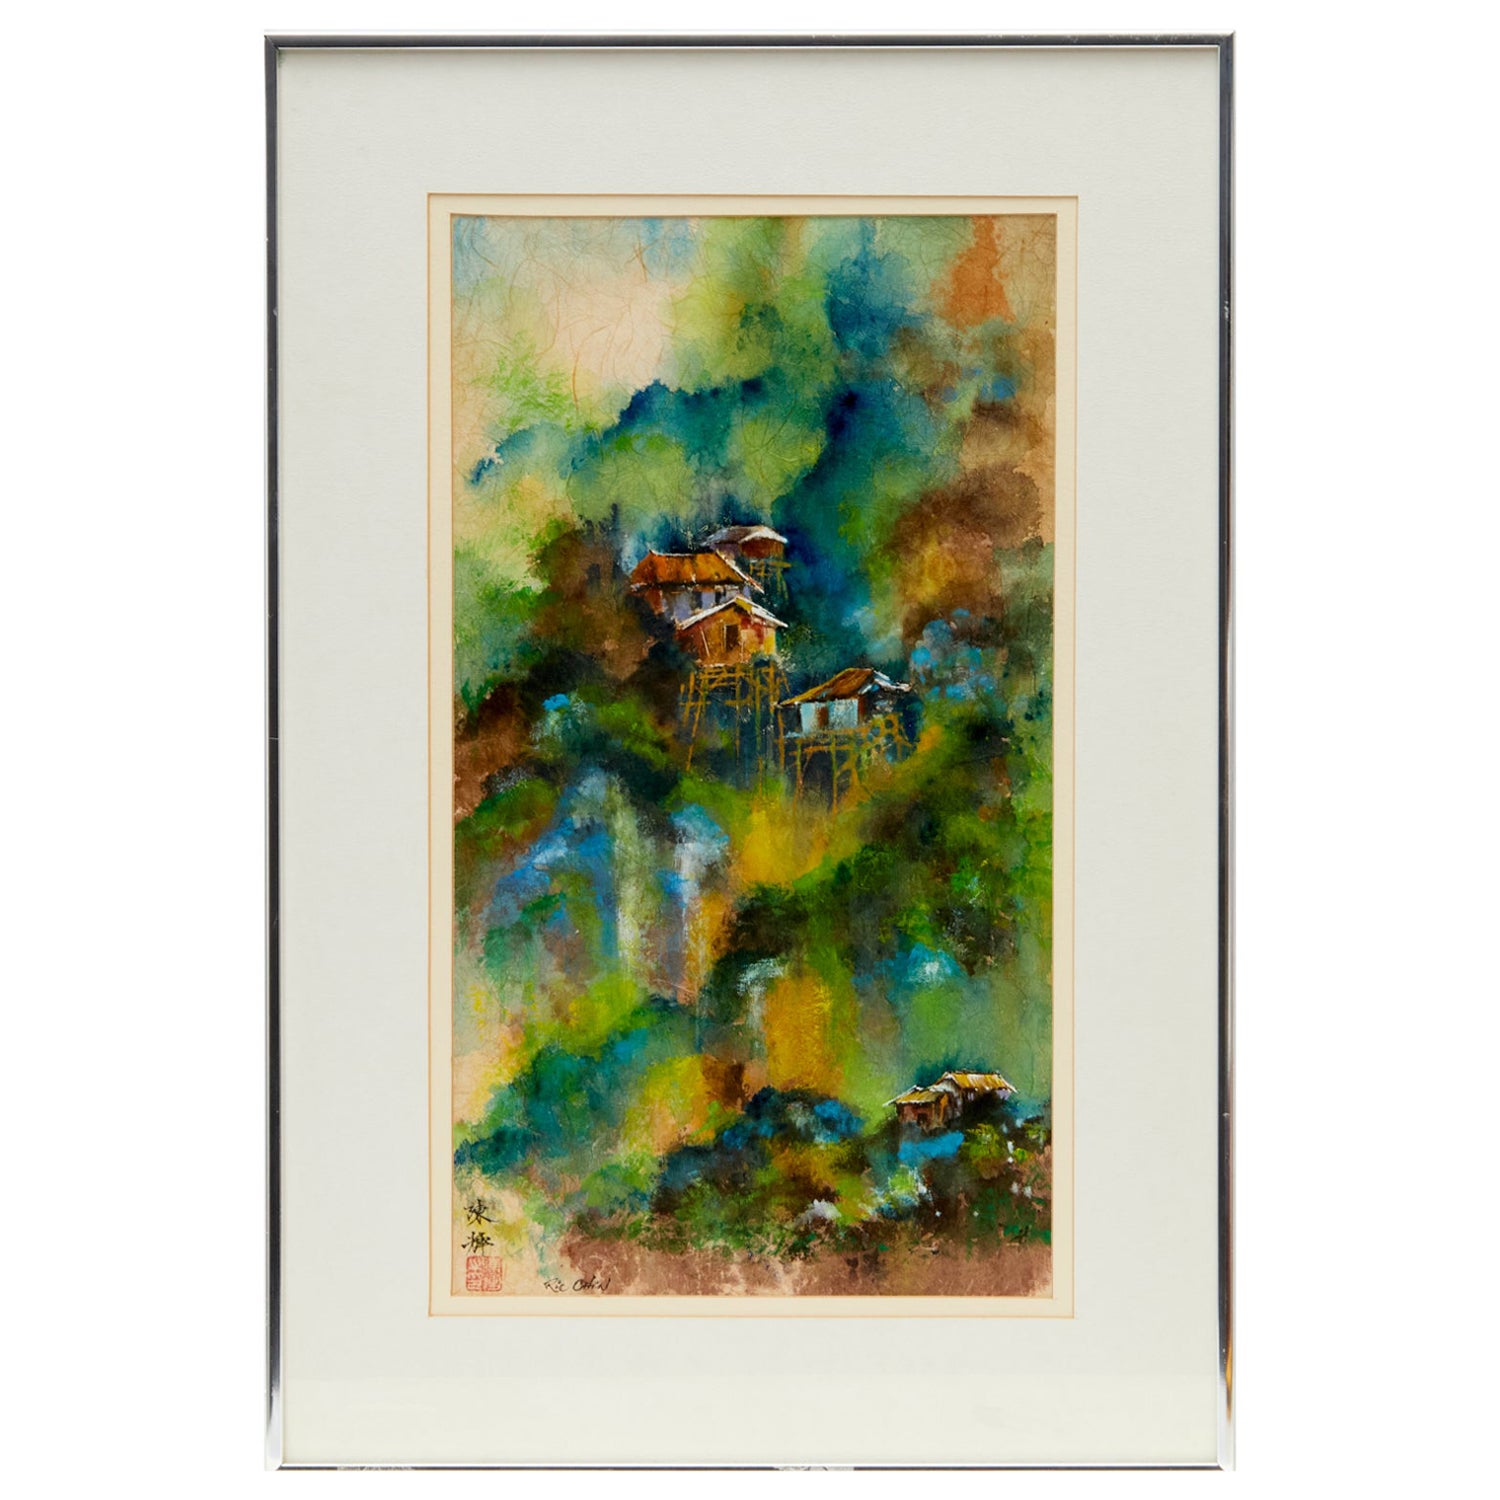 20th C. Ric Chin, Watercolor on Paper, Houses in Landscape